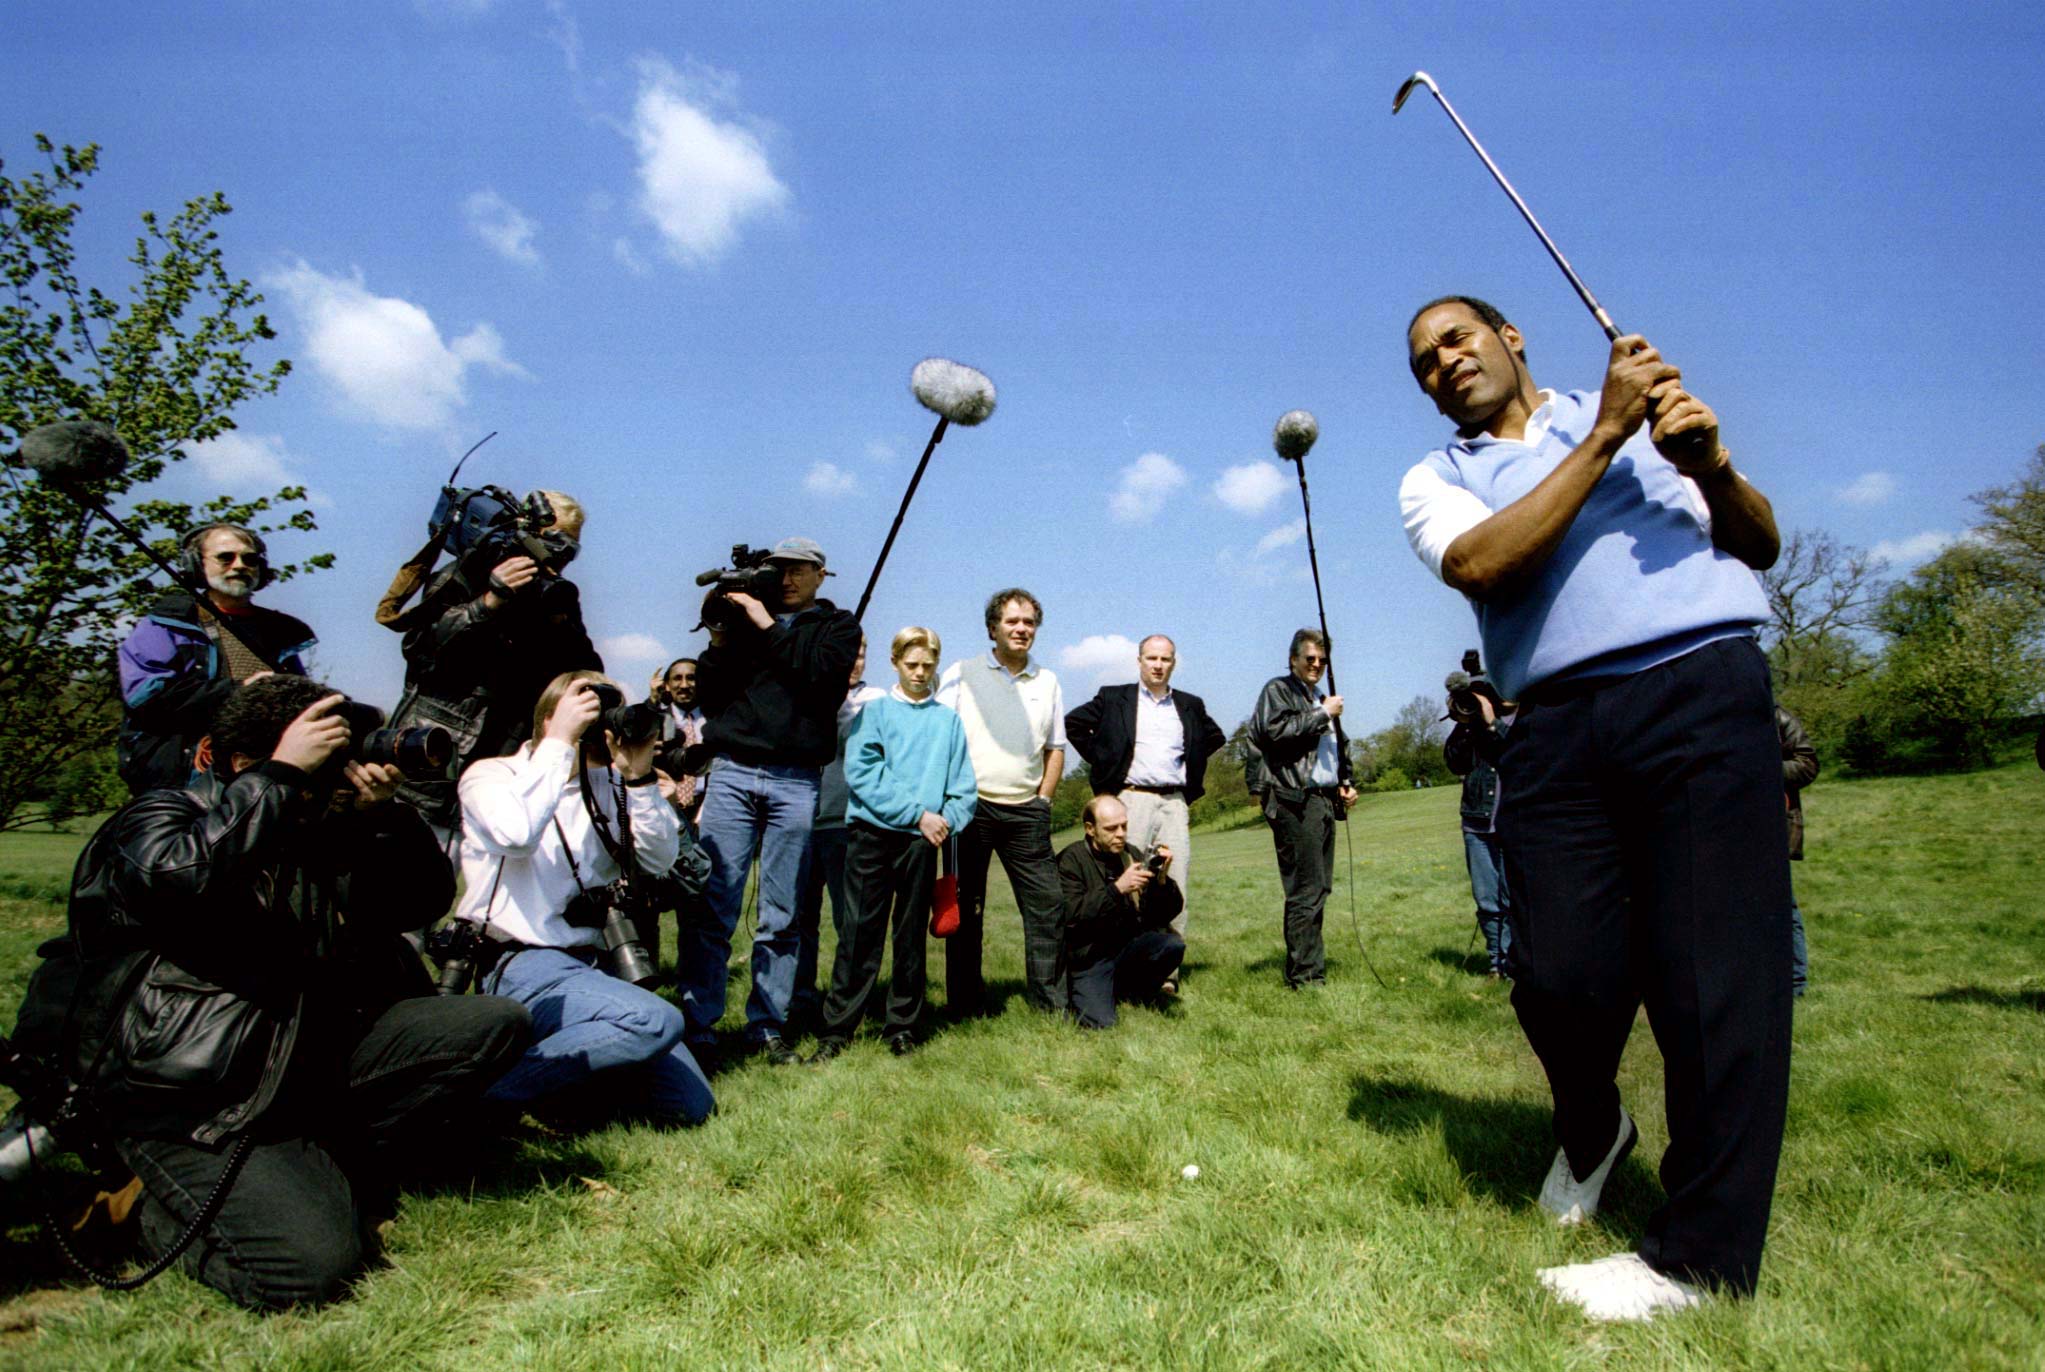 OJ SIMPSON PLAYS HIS WAY OUT OF THE ROUGH